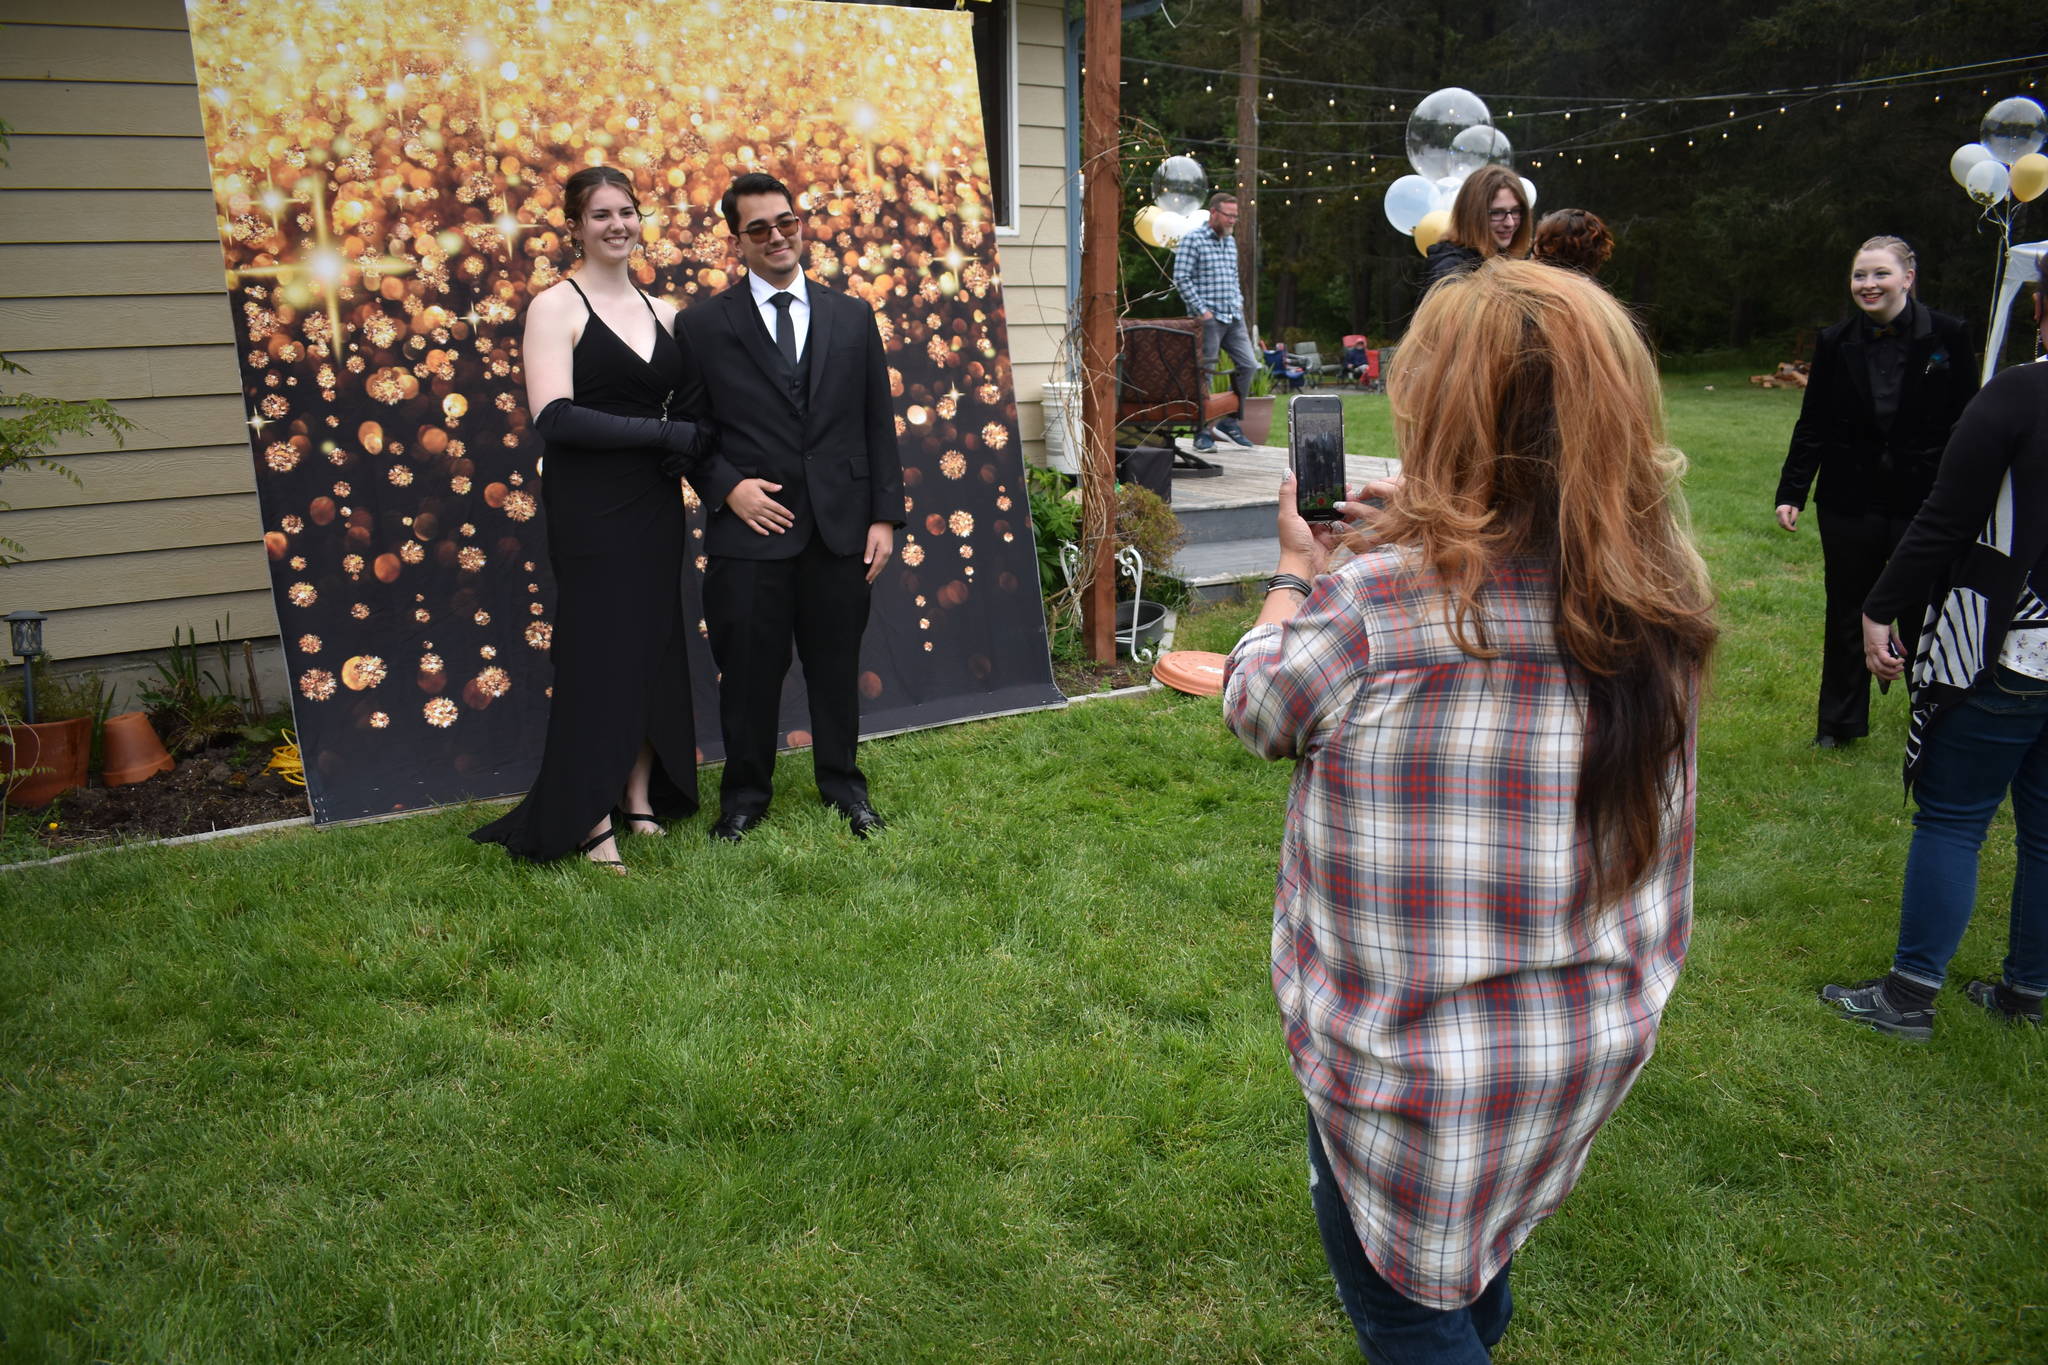 Synnove Svendsen and her boyfriend Landon Pohlman pose for a picture at a prom hosted in her family’s backyard last Saturday. (Photos by Emily Gilbert/Whidbey News-Times)